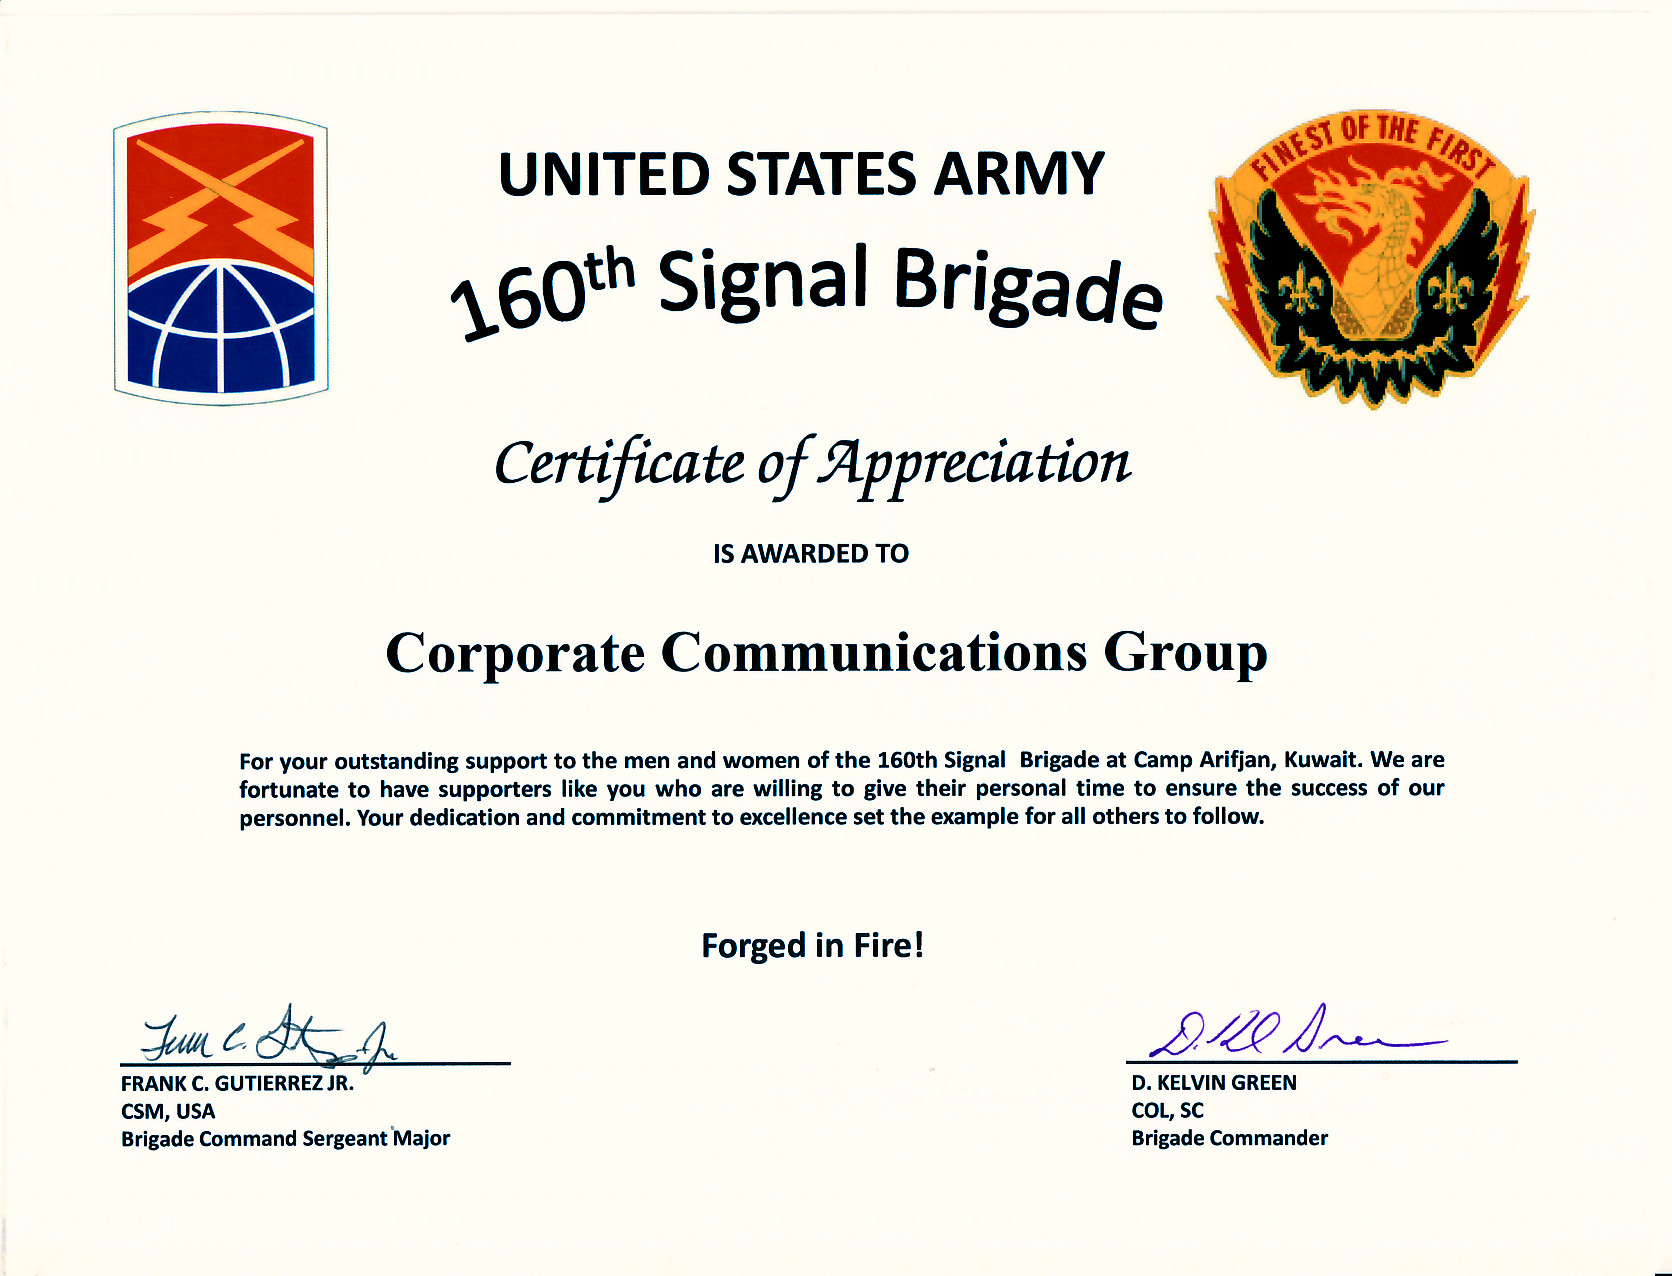 CCG Receives Certificate of Appreciation from U S Army